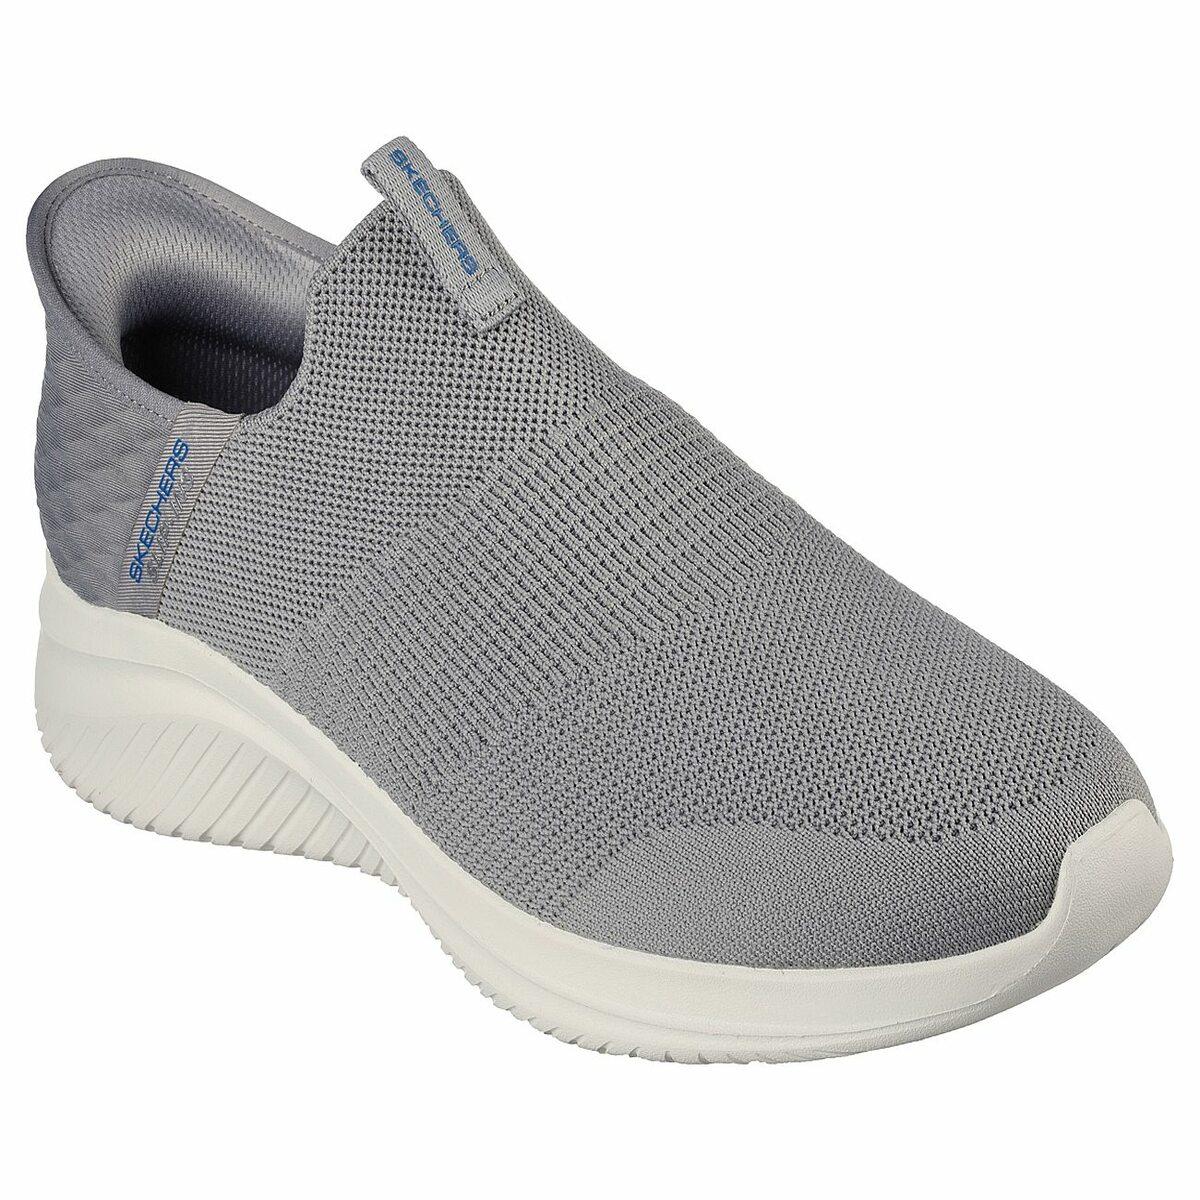 Men's Wide Easy Slip On Sneakers Without Laces | June Adaptive